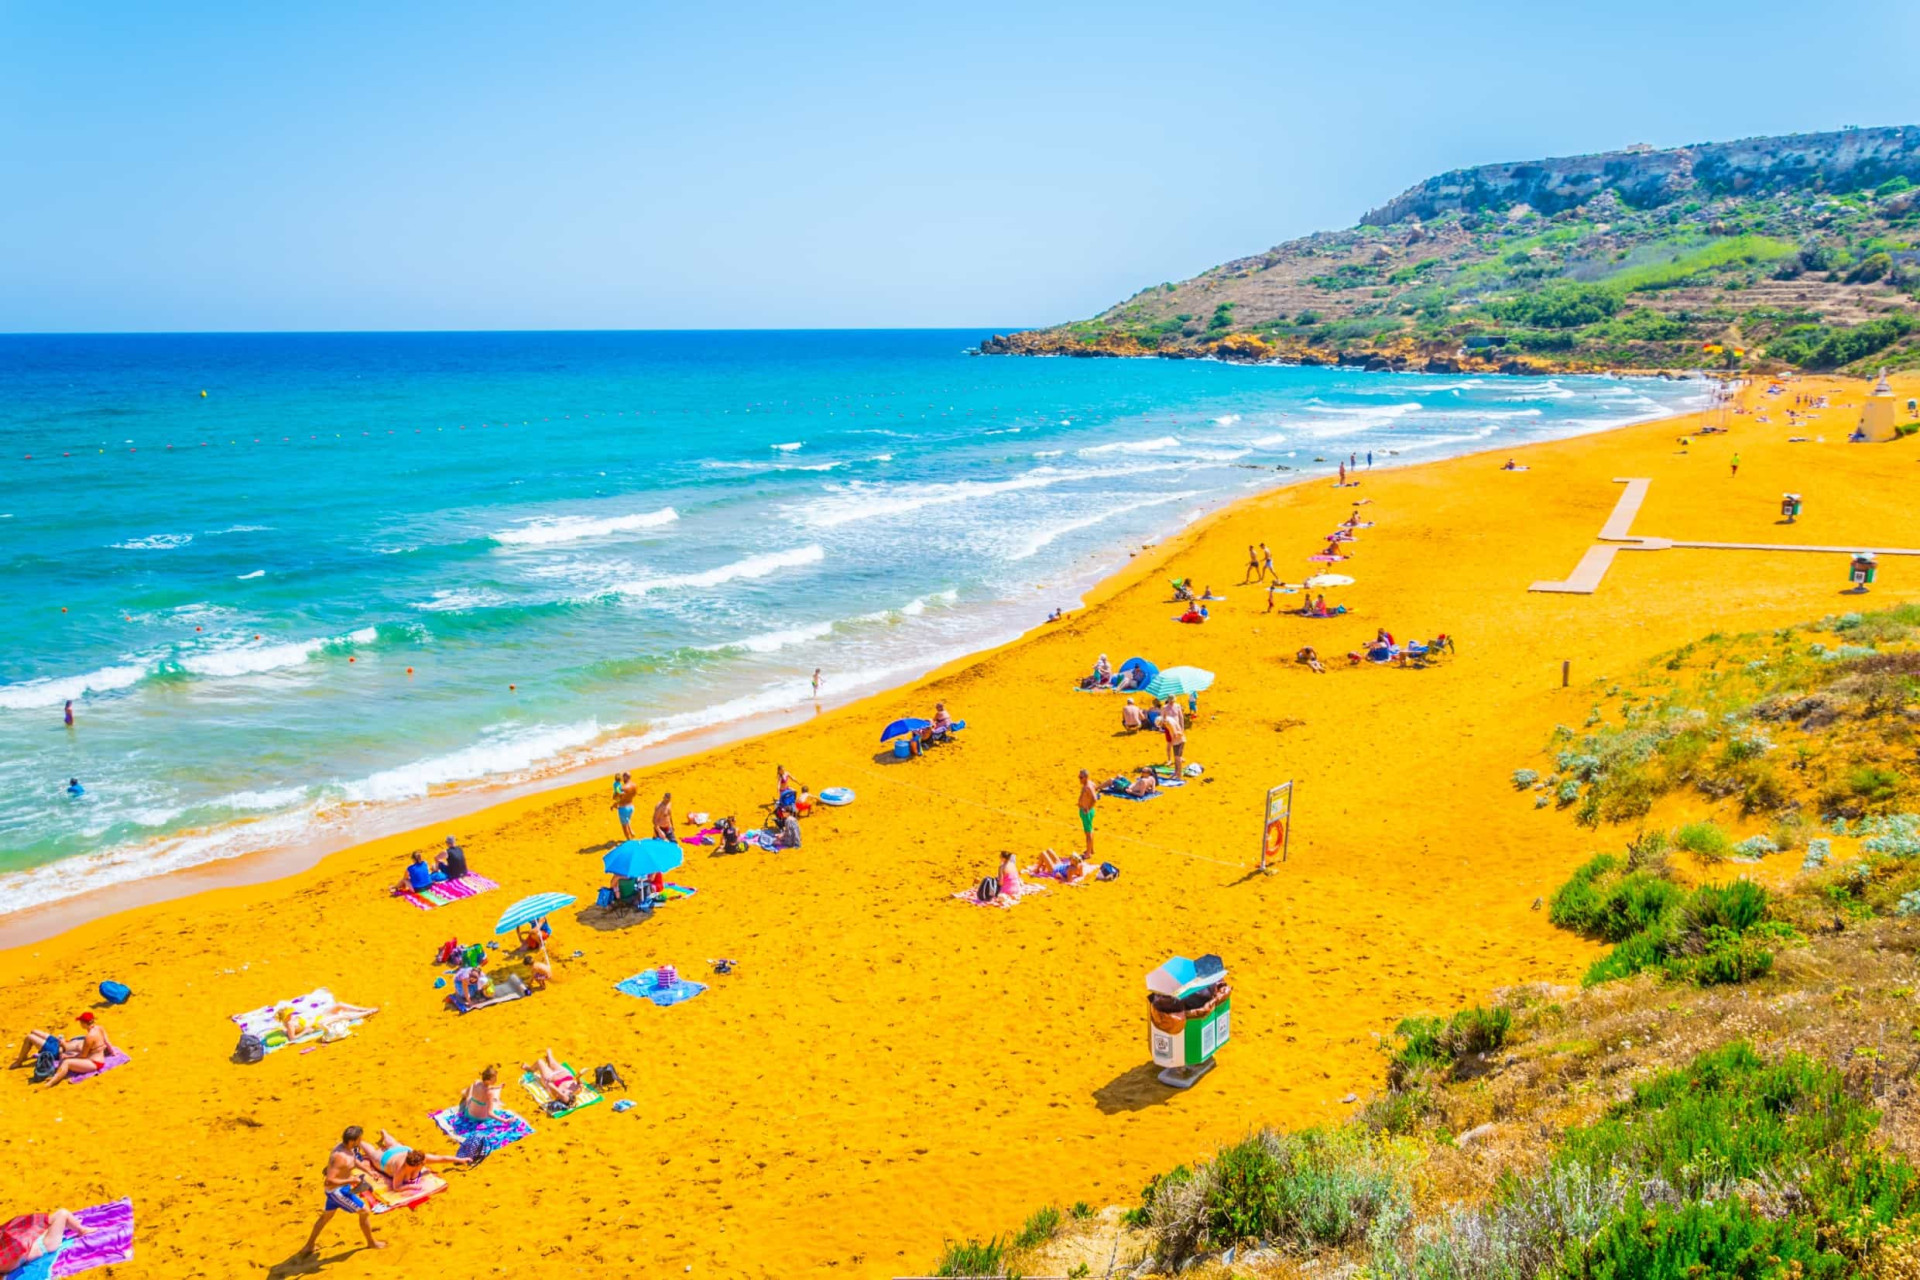 <p>Malta receives around 300 days of sun per year, with short mild winters. The rocky island is dotted with quaint fishing villages, and the smaller nearby island of Gozo is more affordable in terms of housing costs. </p><p><a href="https://www.msn.com/en-us/community/channel/vid-7xx8mnucu55yw63we9va2gwr7uihbxwc68fxqp25x6tg4ftibpra?cvid=94631541bc0f4f89bfd59158d696ad7e">Follow us and access great exclusive content every day</a></p>